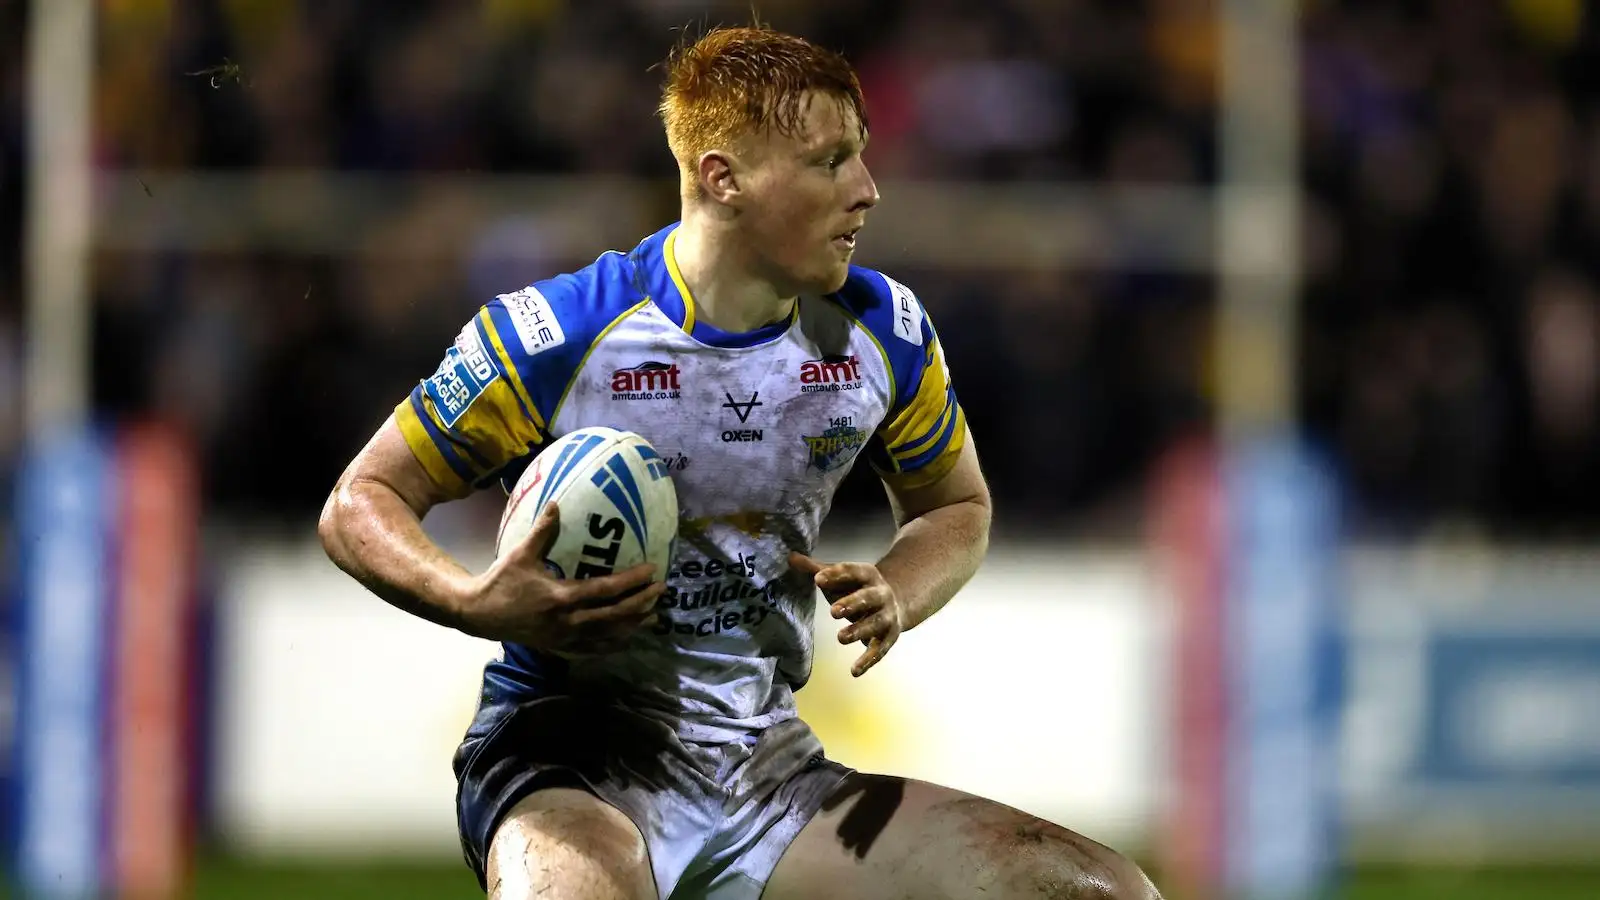 Exclusive: Leeds Rhinos man attracting interest from Super League clubs for 2025